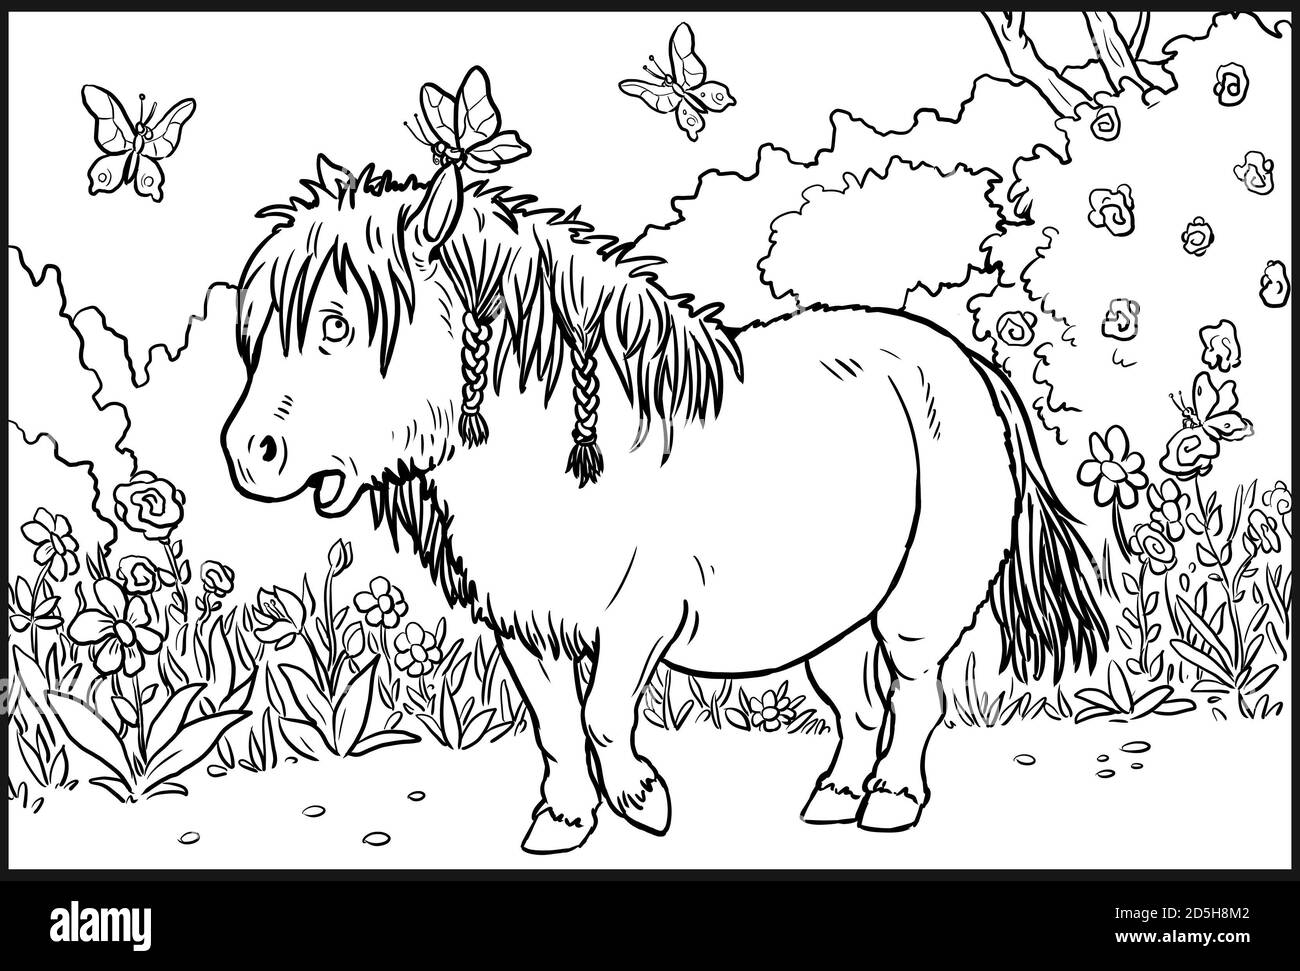 Funny pony for coloring. Colouring page for horse lovers. Stock Photo